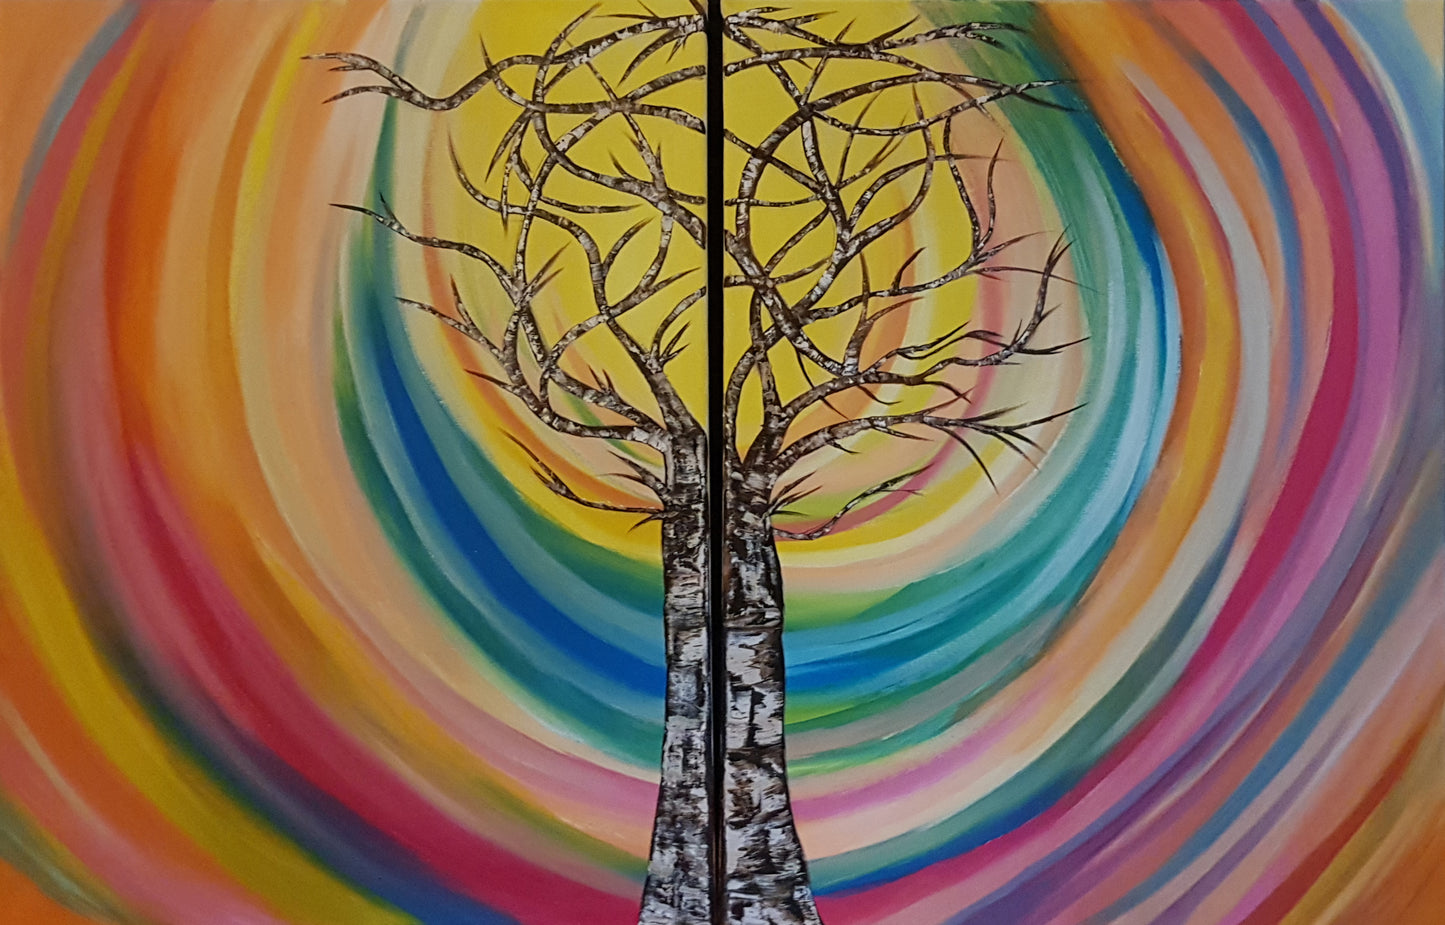 Tree-of-Knowledge-and-Paradise-Alexandra-Romano-Art-Original-Beautiful-Impressionism-Artwork-on-Canvas-Tree-of-Life-Colourful-Oil-Paintings-for-Sale